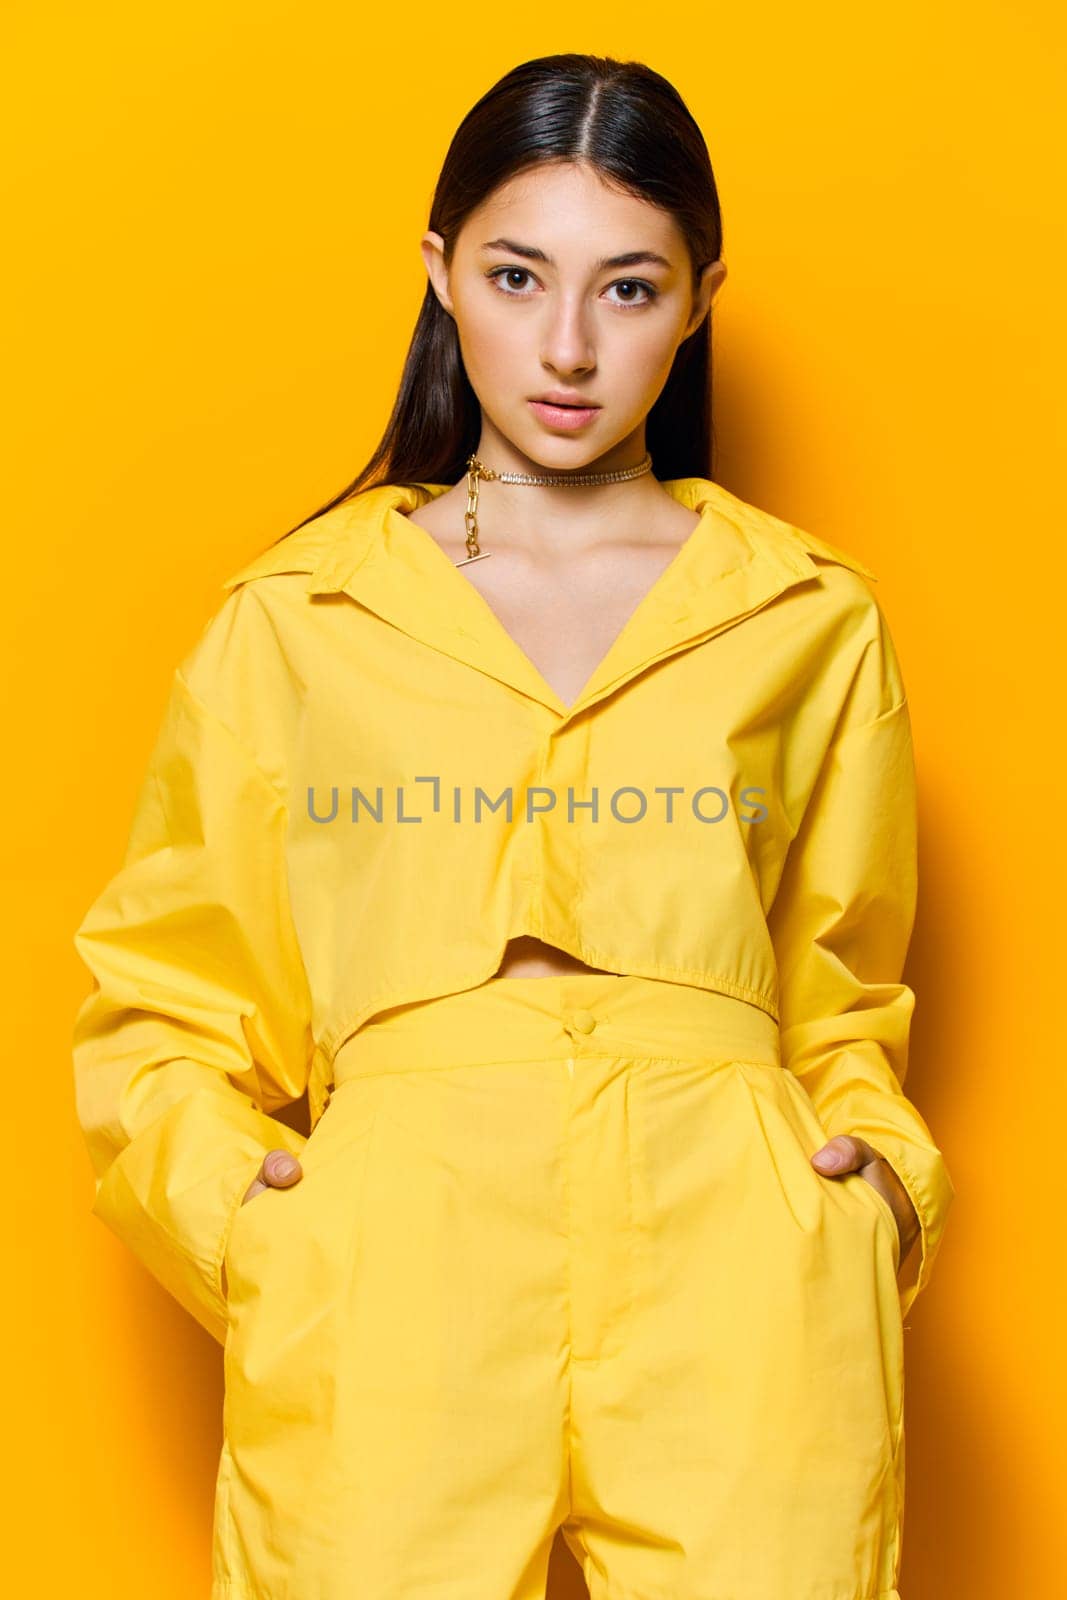 woman person young girl lovely attractive yellow lady fashion beautiful trendy style outfit funny caucasian glamour positive lifestyle smile happy model